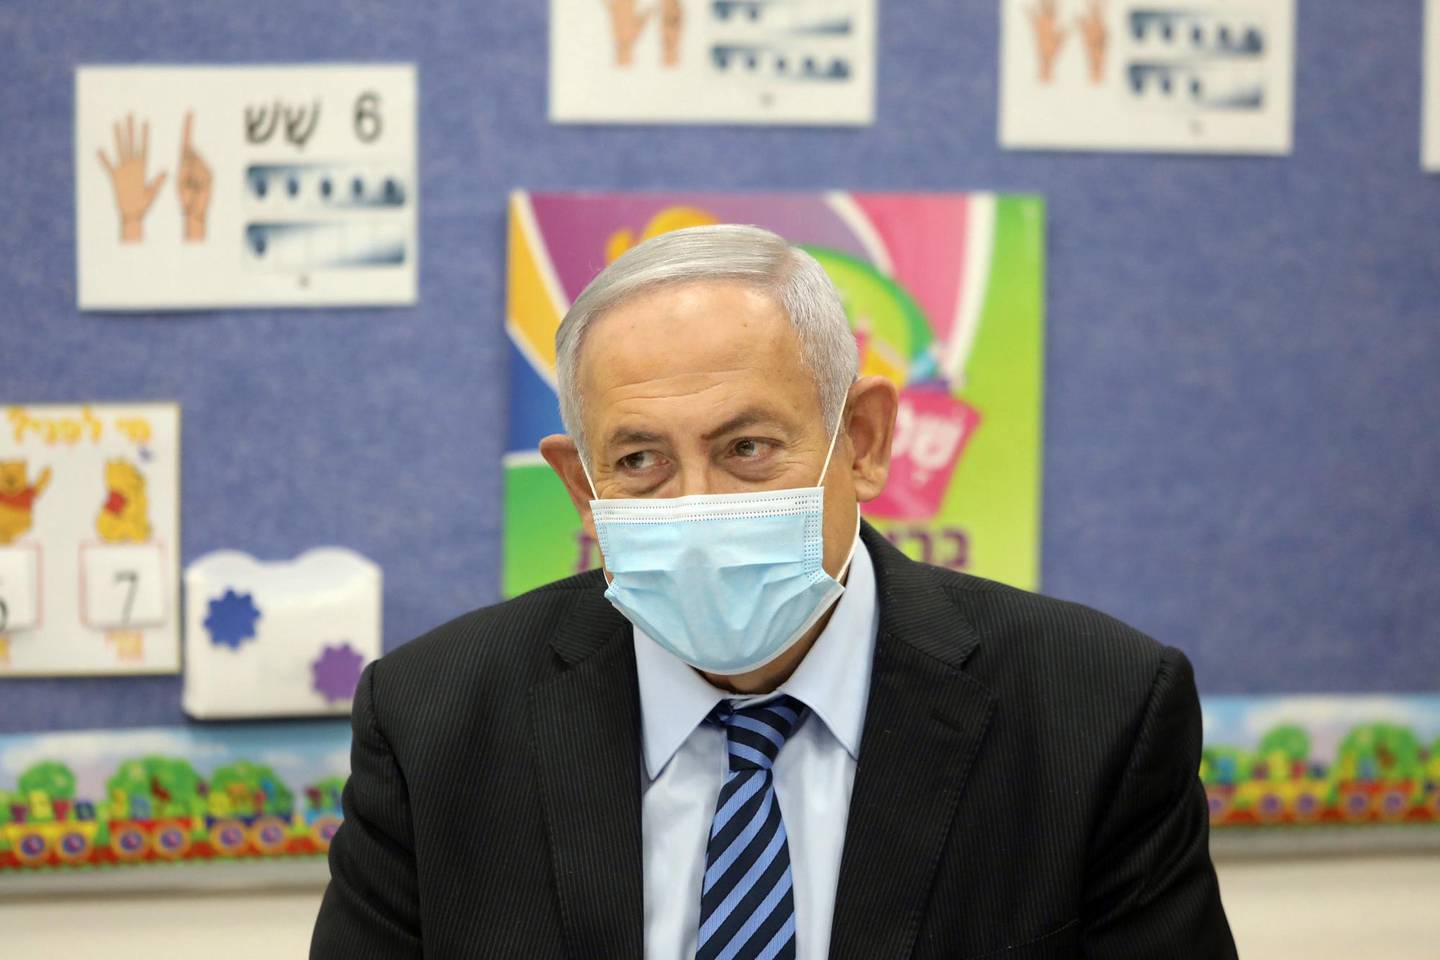 Israeli Prime Minister Benjamin Netanyahu attends a ceremony to mark the start of the school year, at the Netaim School in the West Bank settlement of Mevo Horon, September 1, 2020. Marc Israel Sellem/Pool via REUTERS